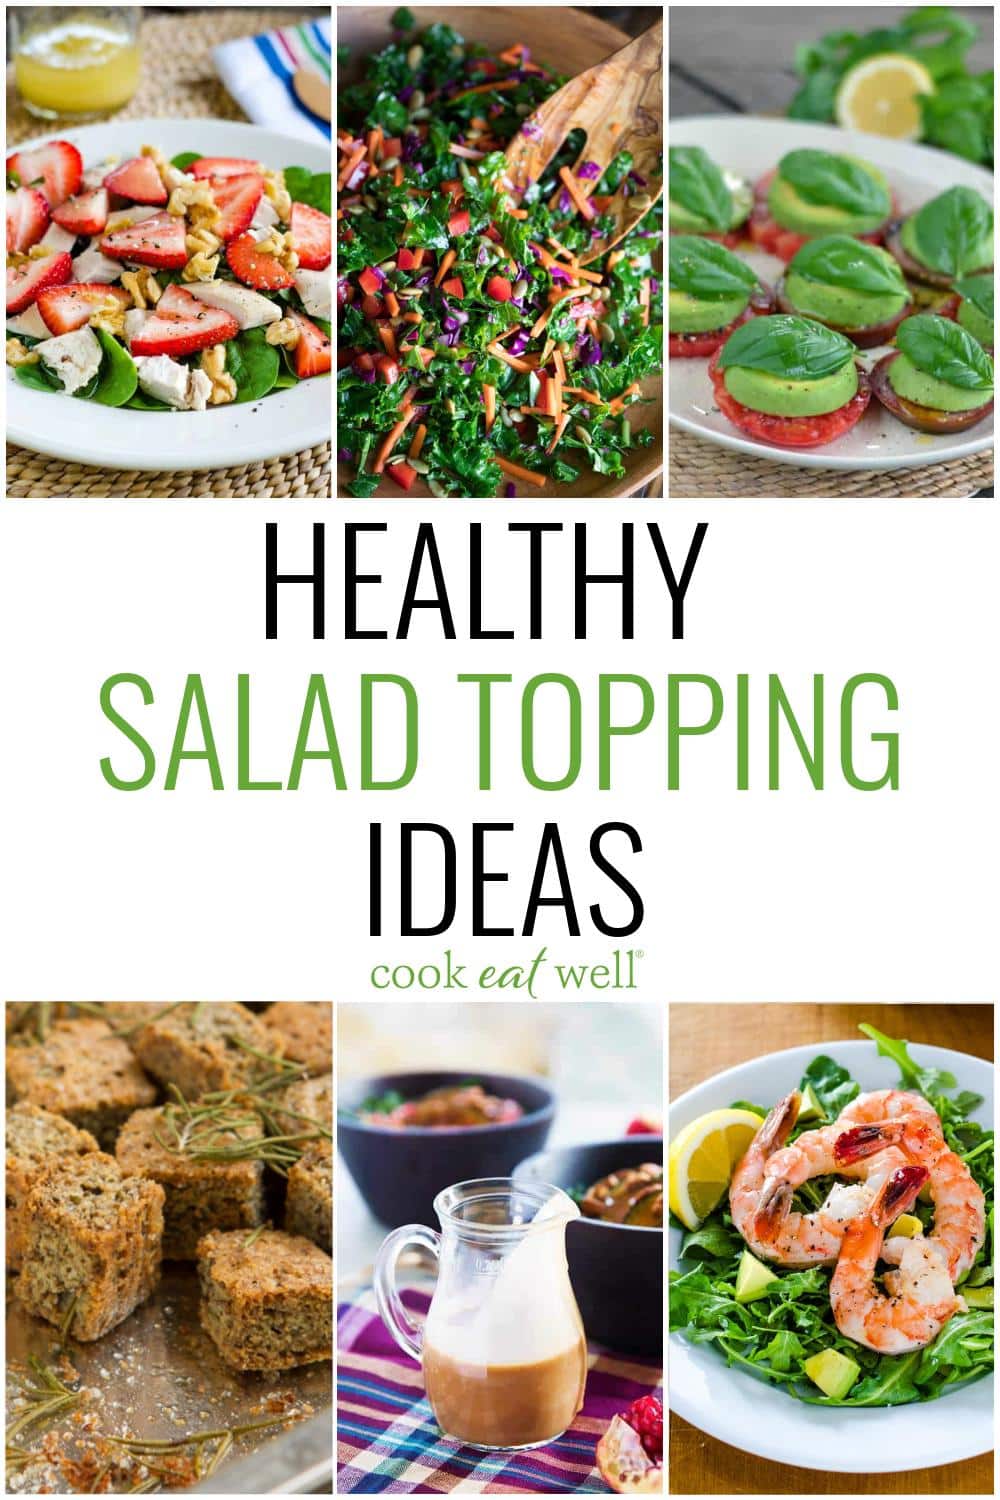 Healthy salad topping ideas